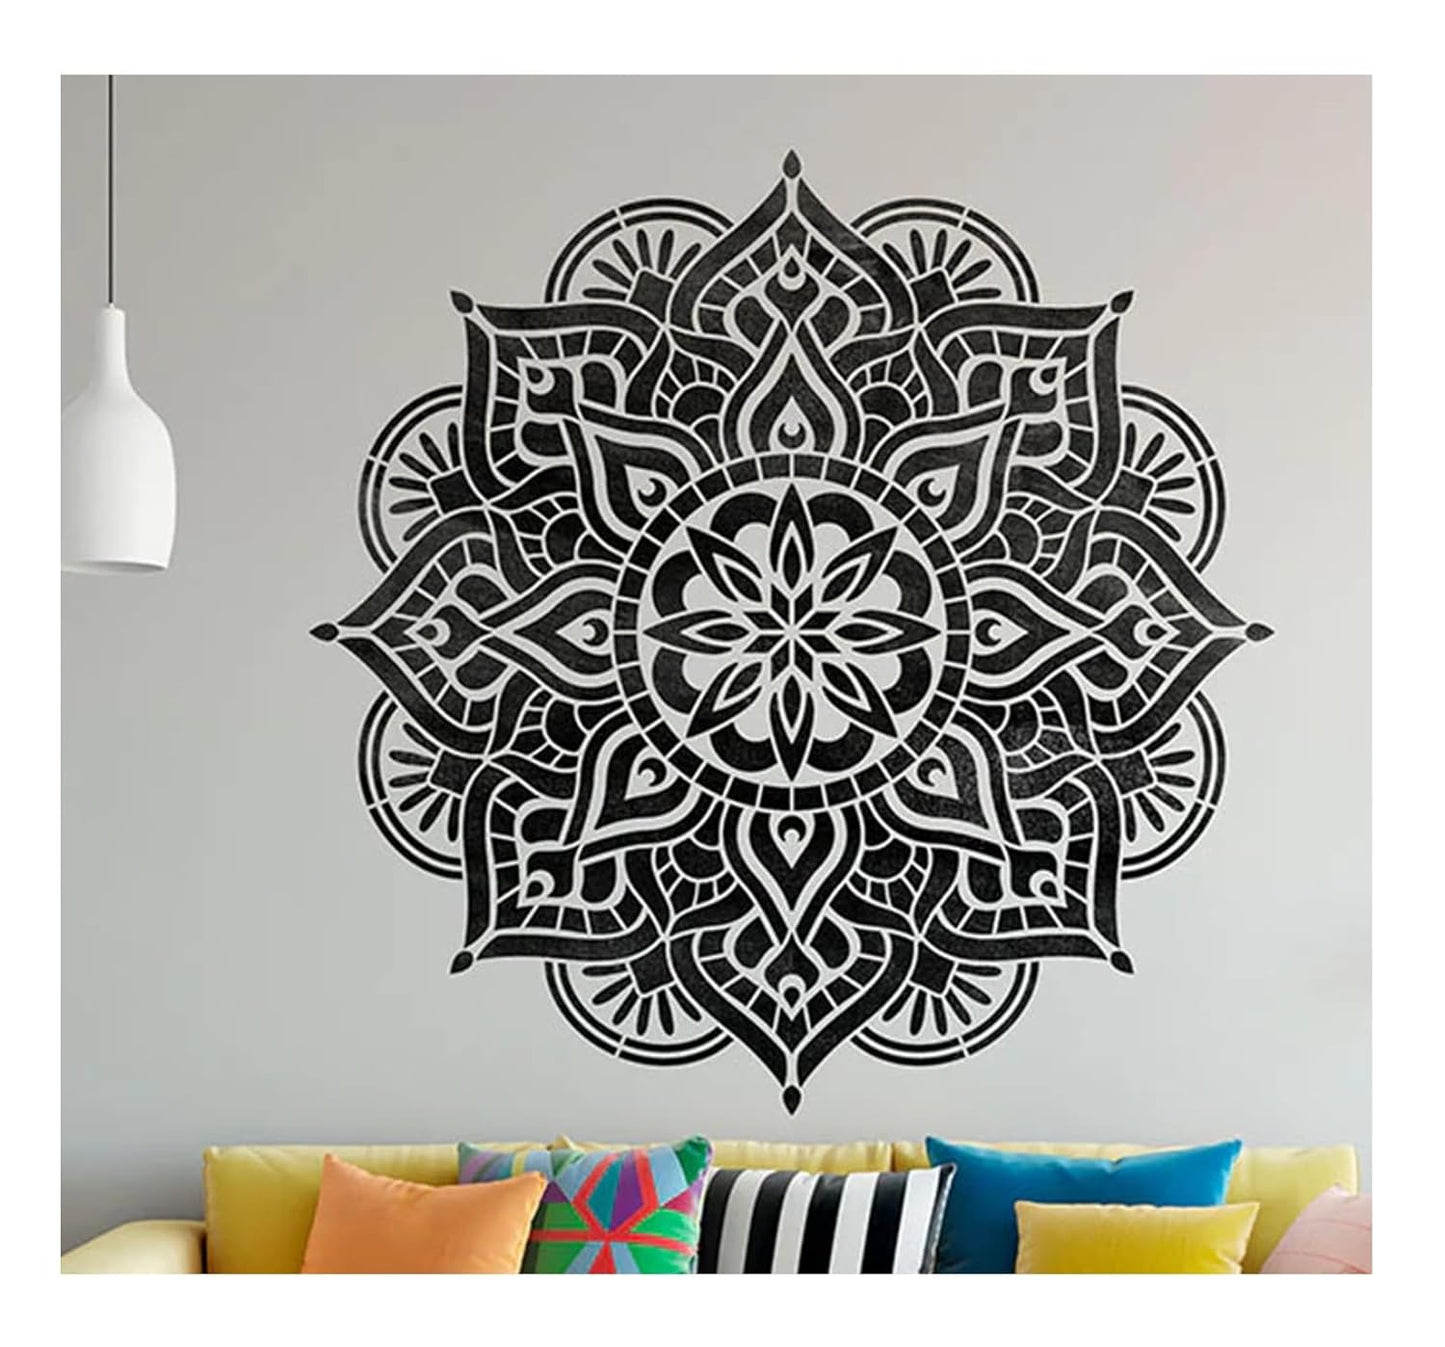 Latest Pranayam Full Mandala Stencils for Wall Painting - Pack of 1, Sheet Size 36 x 36 inch/Design for Wall Painting 34 x 34 inch - Large